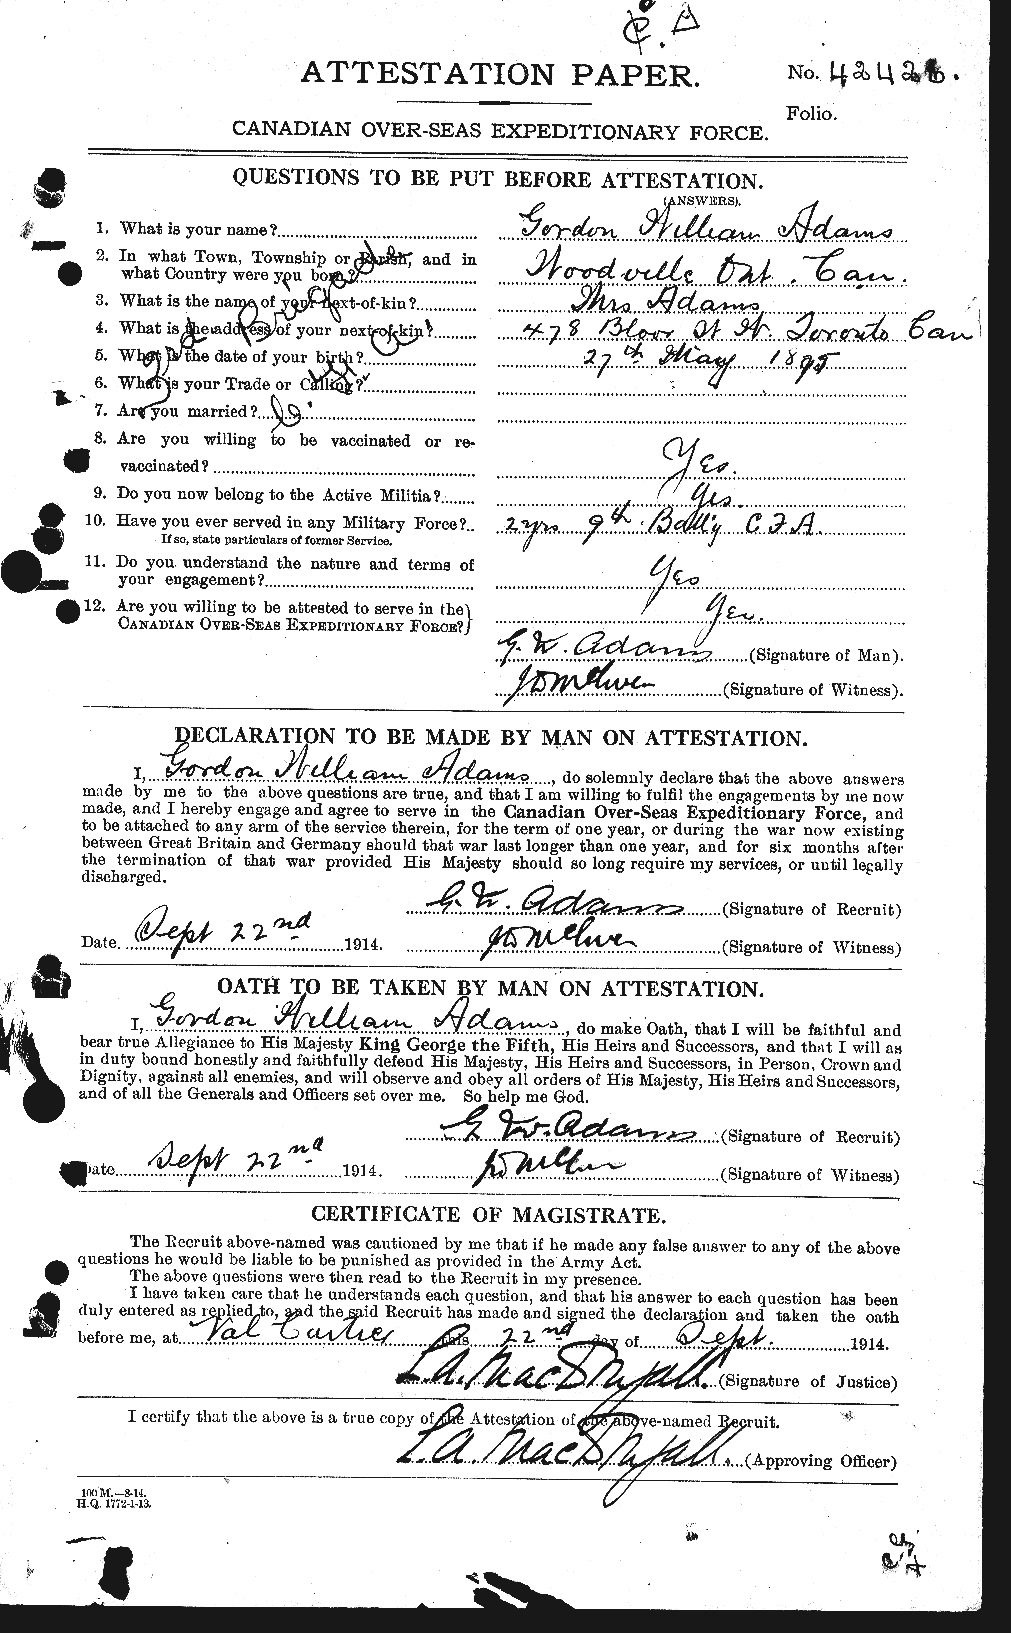 Personnel Records of the First World War - CEF 203140a